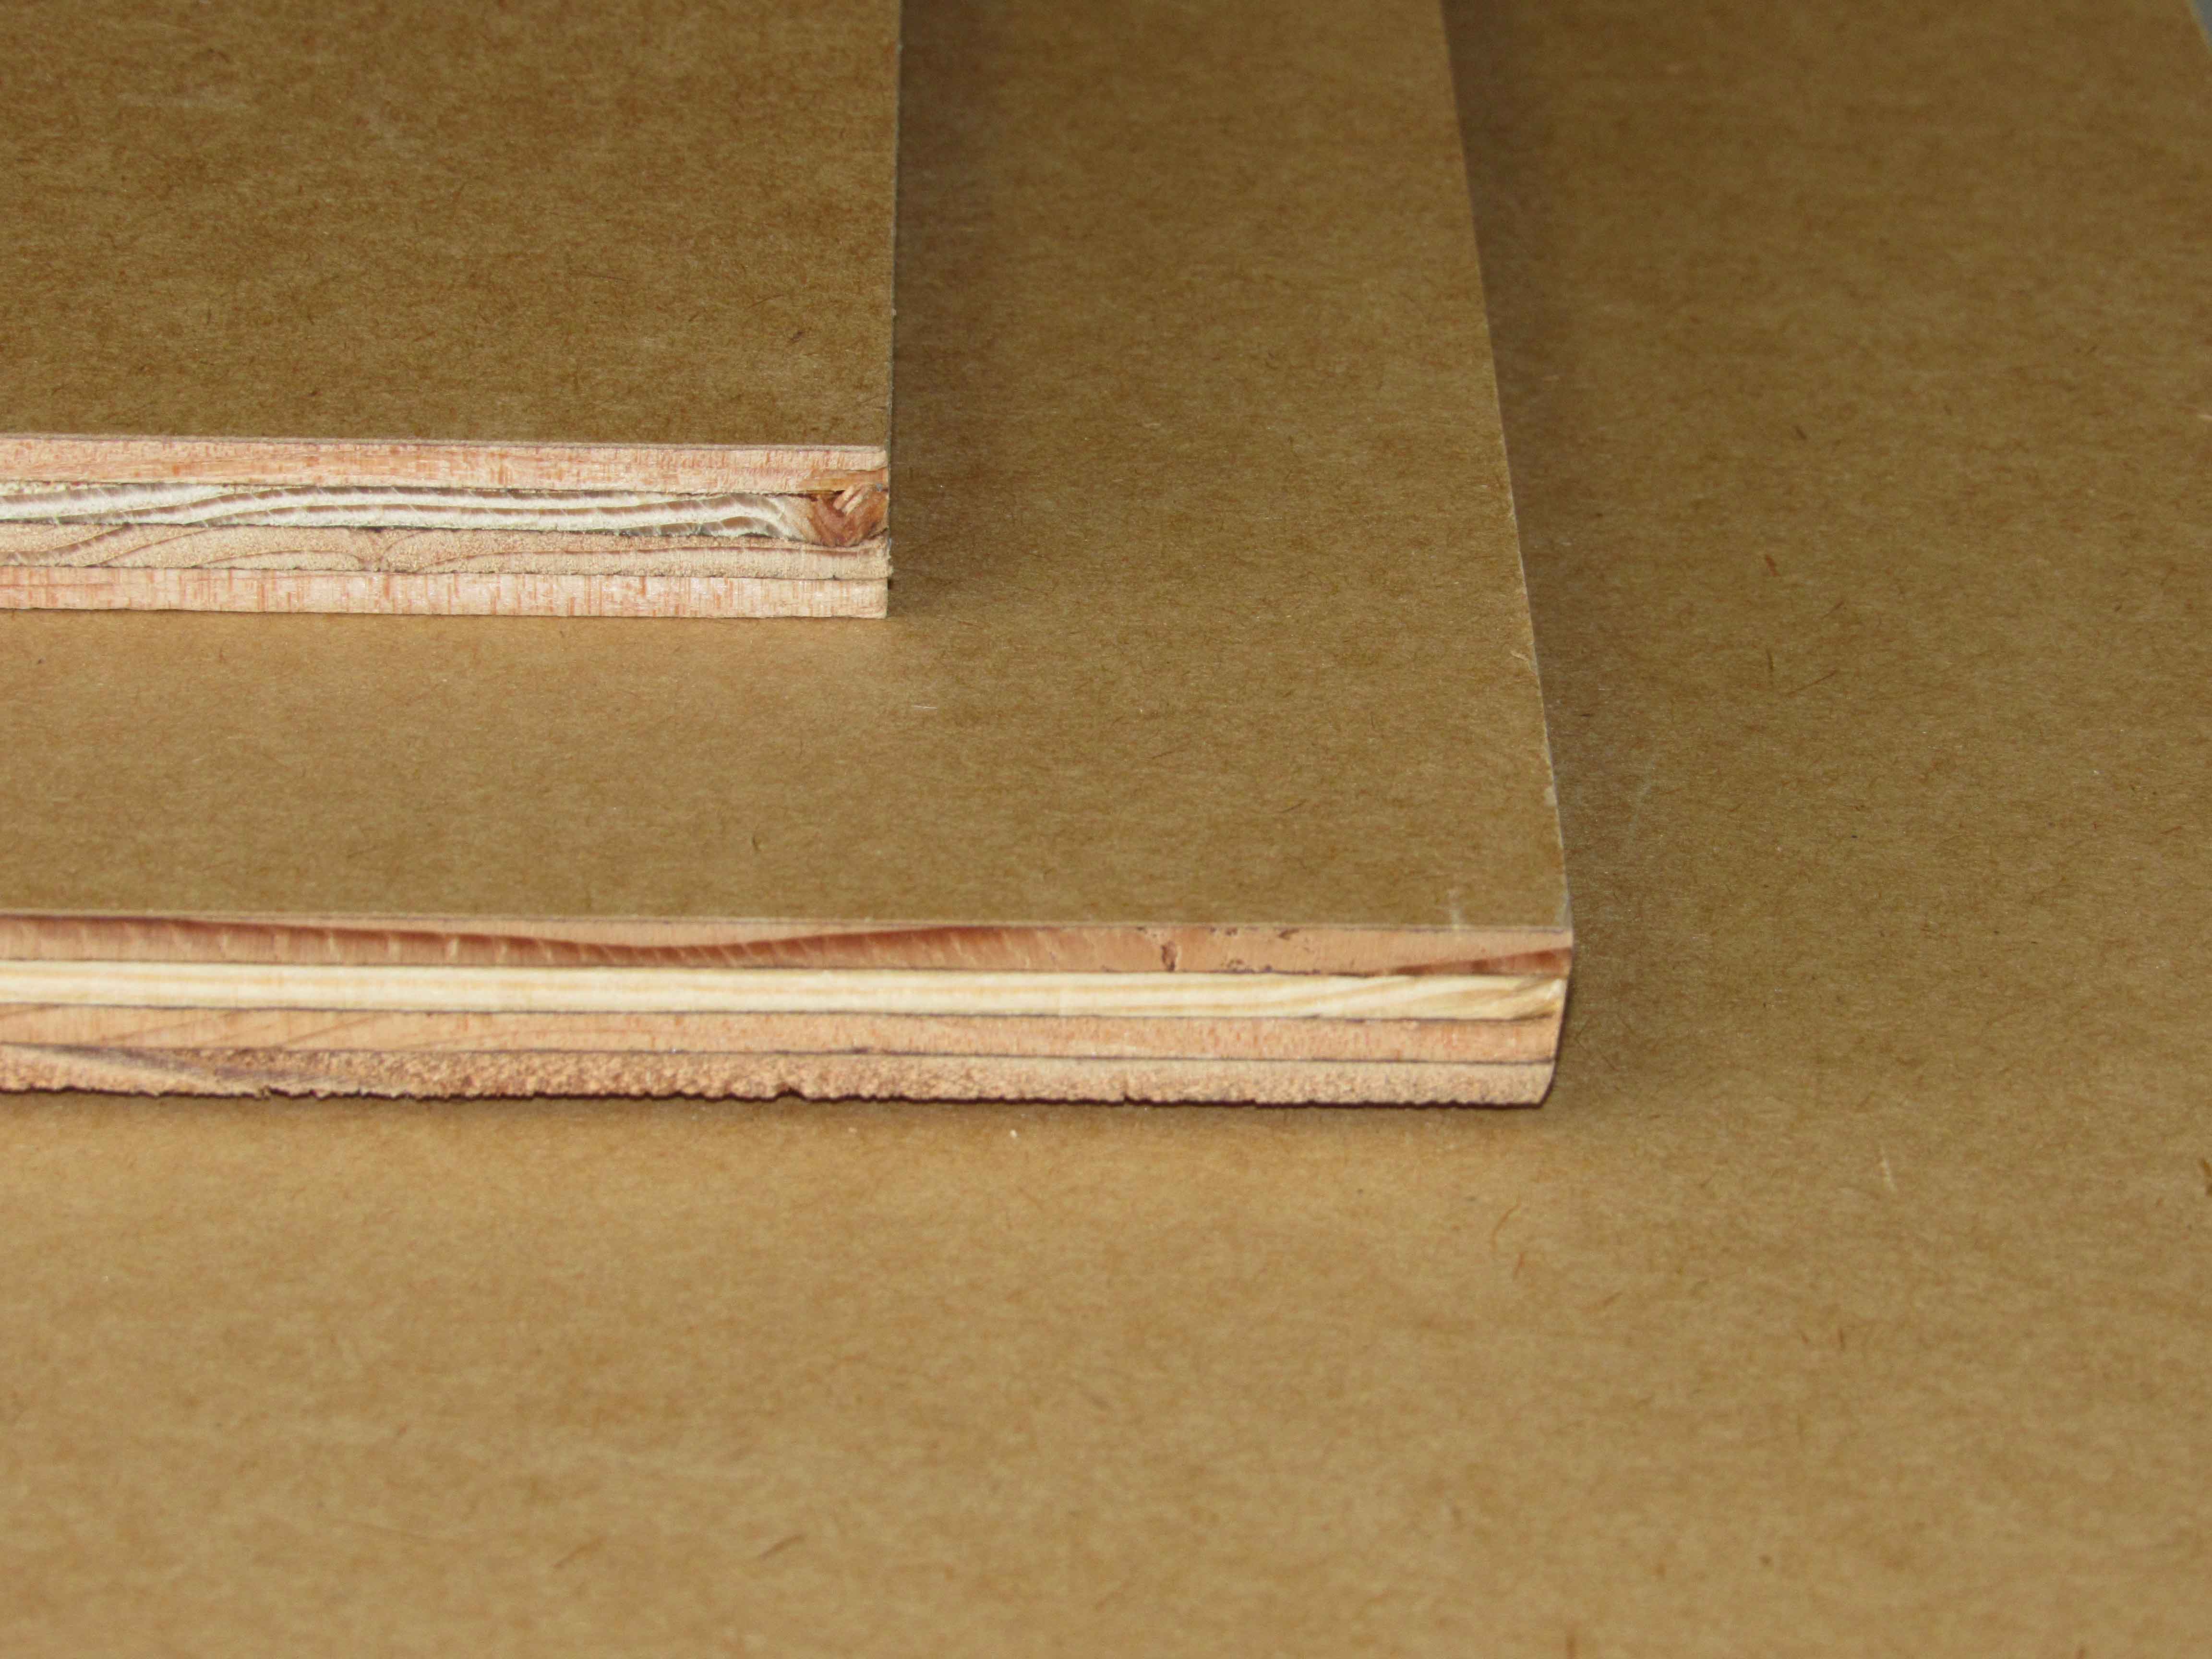 Where to Buy Mdo Plywood in Canada 